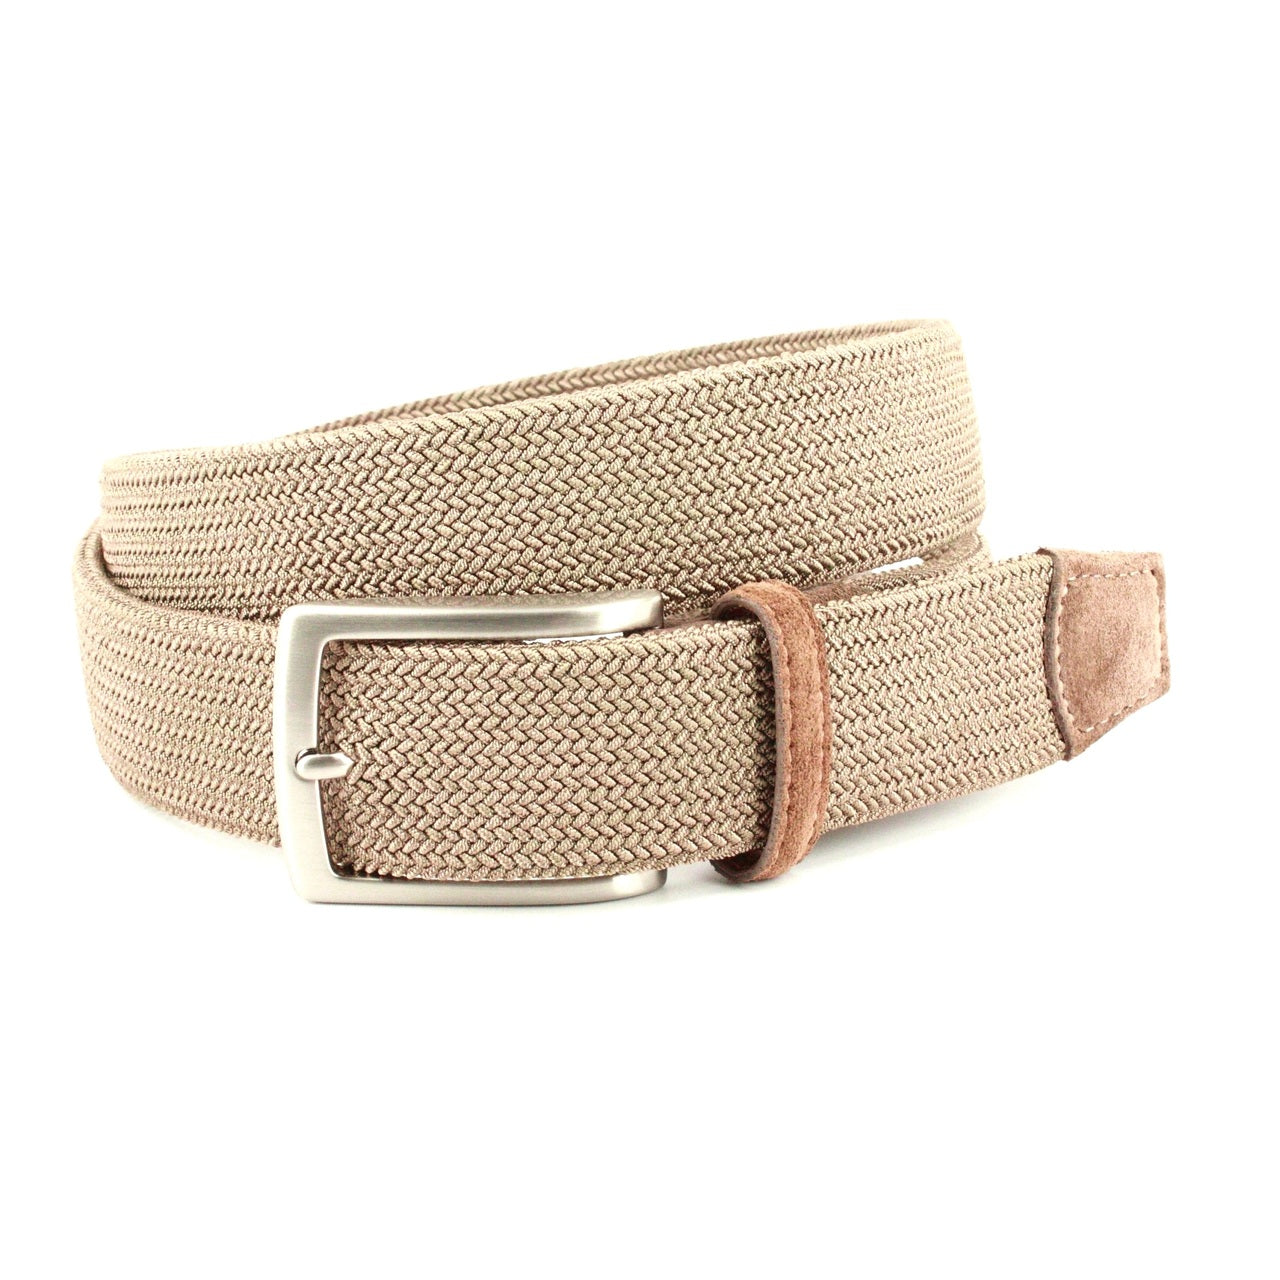 Torino Leather Belt 69048 - Camel - Size 46 - Woven - US Made